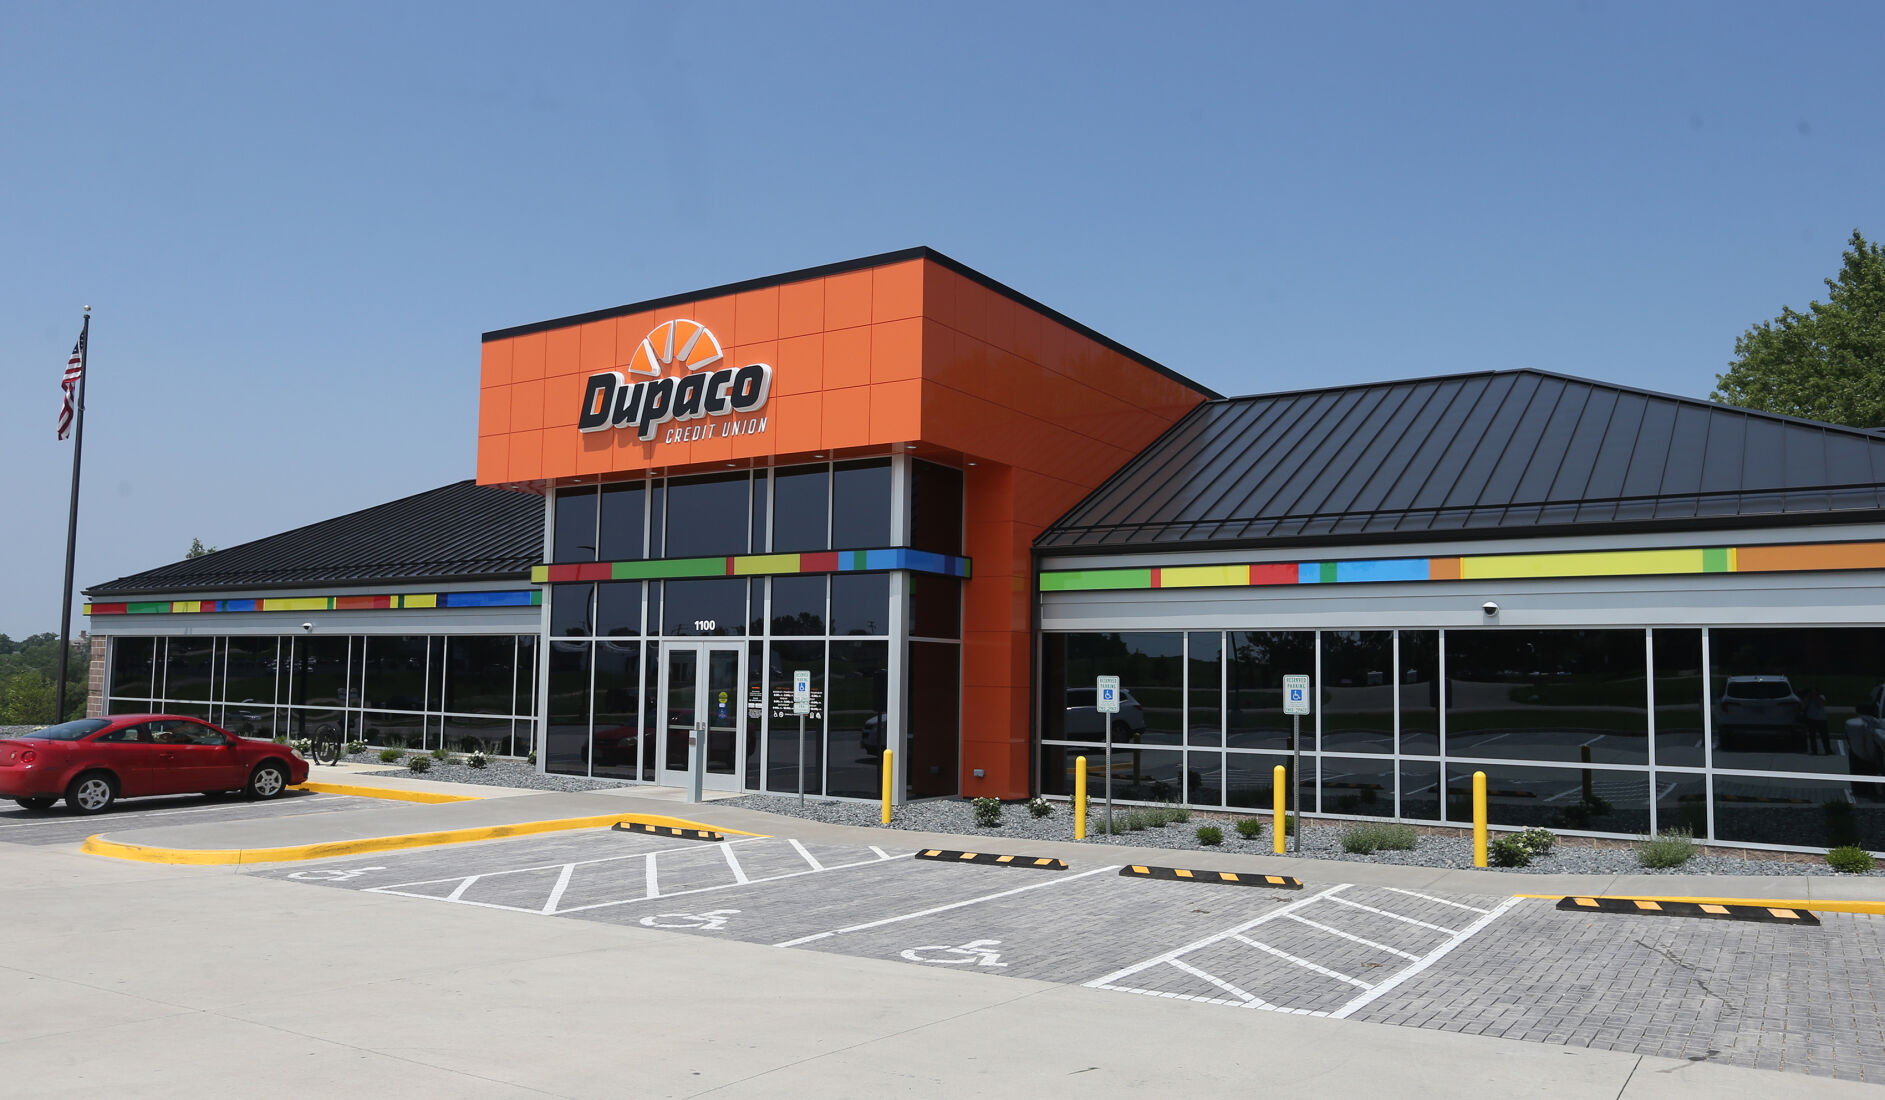 The newly renovated Dupaco building in Platteville, Wis.    PHOTO CREDIT: File photo